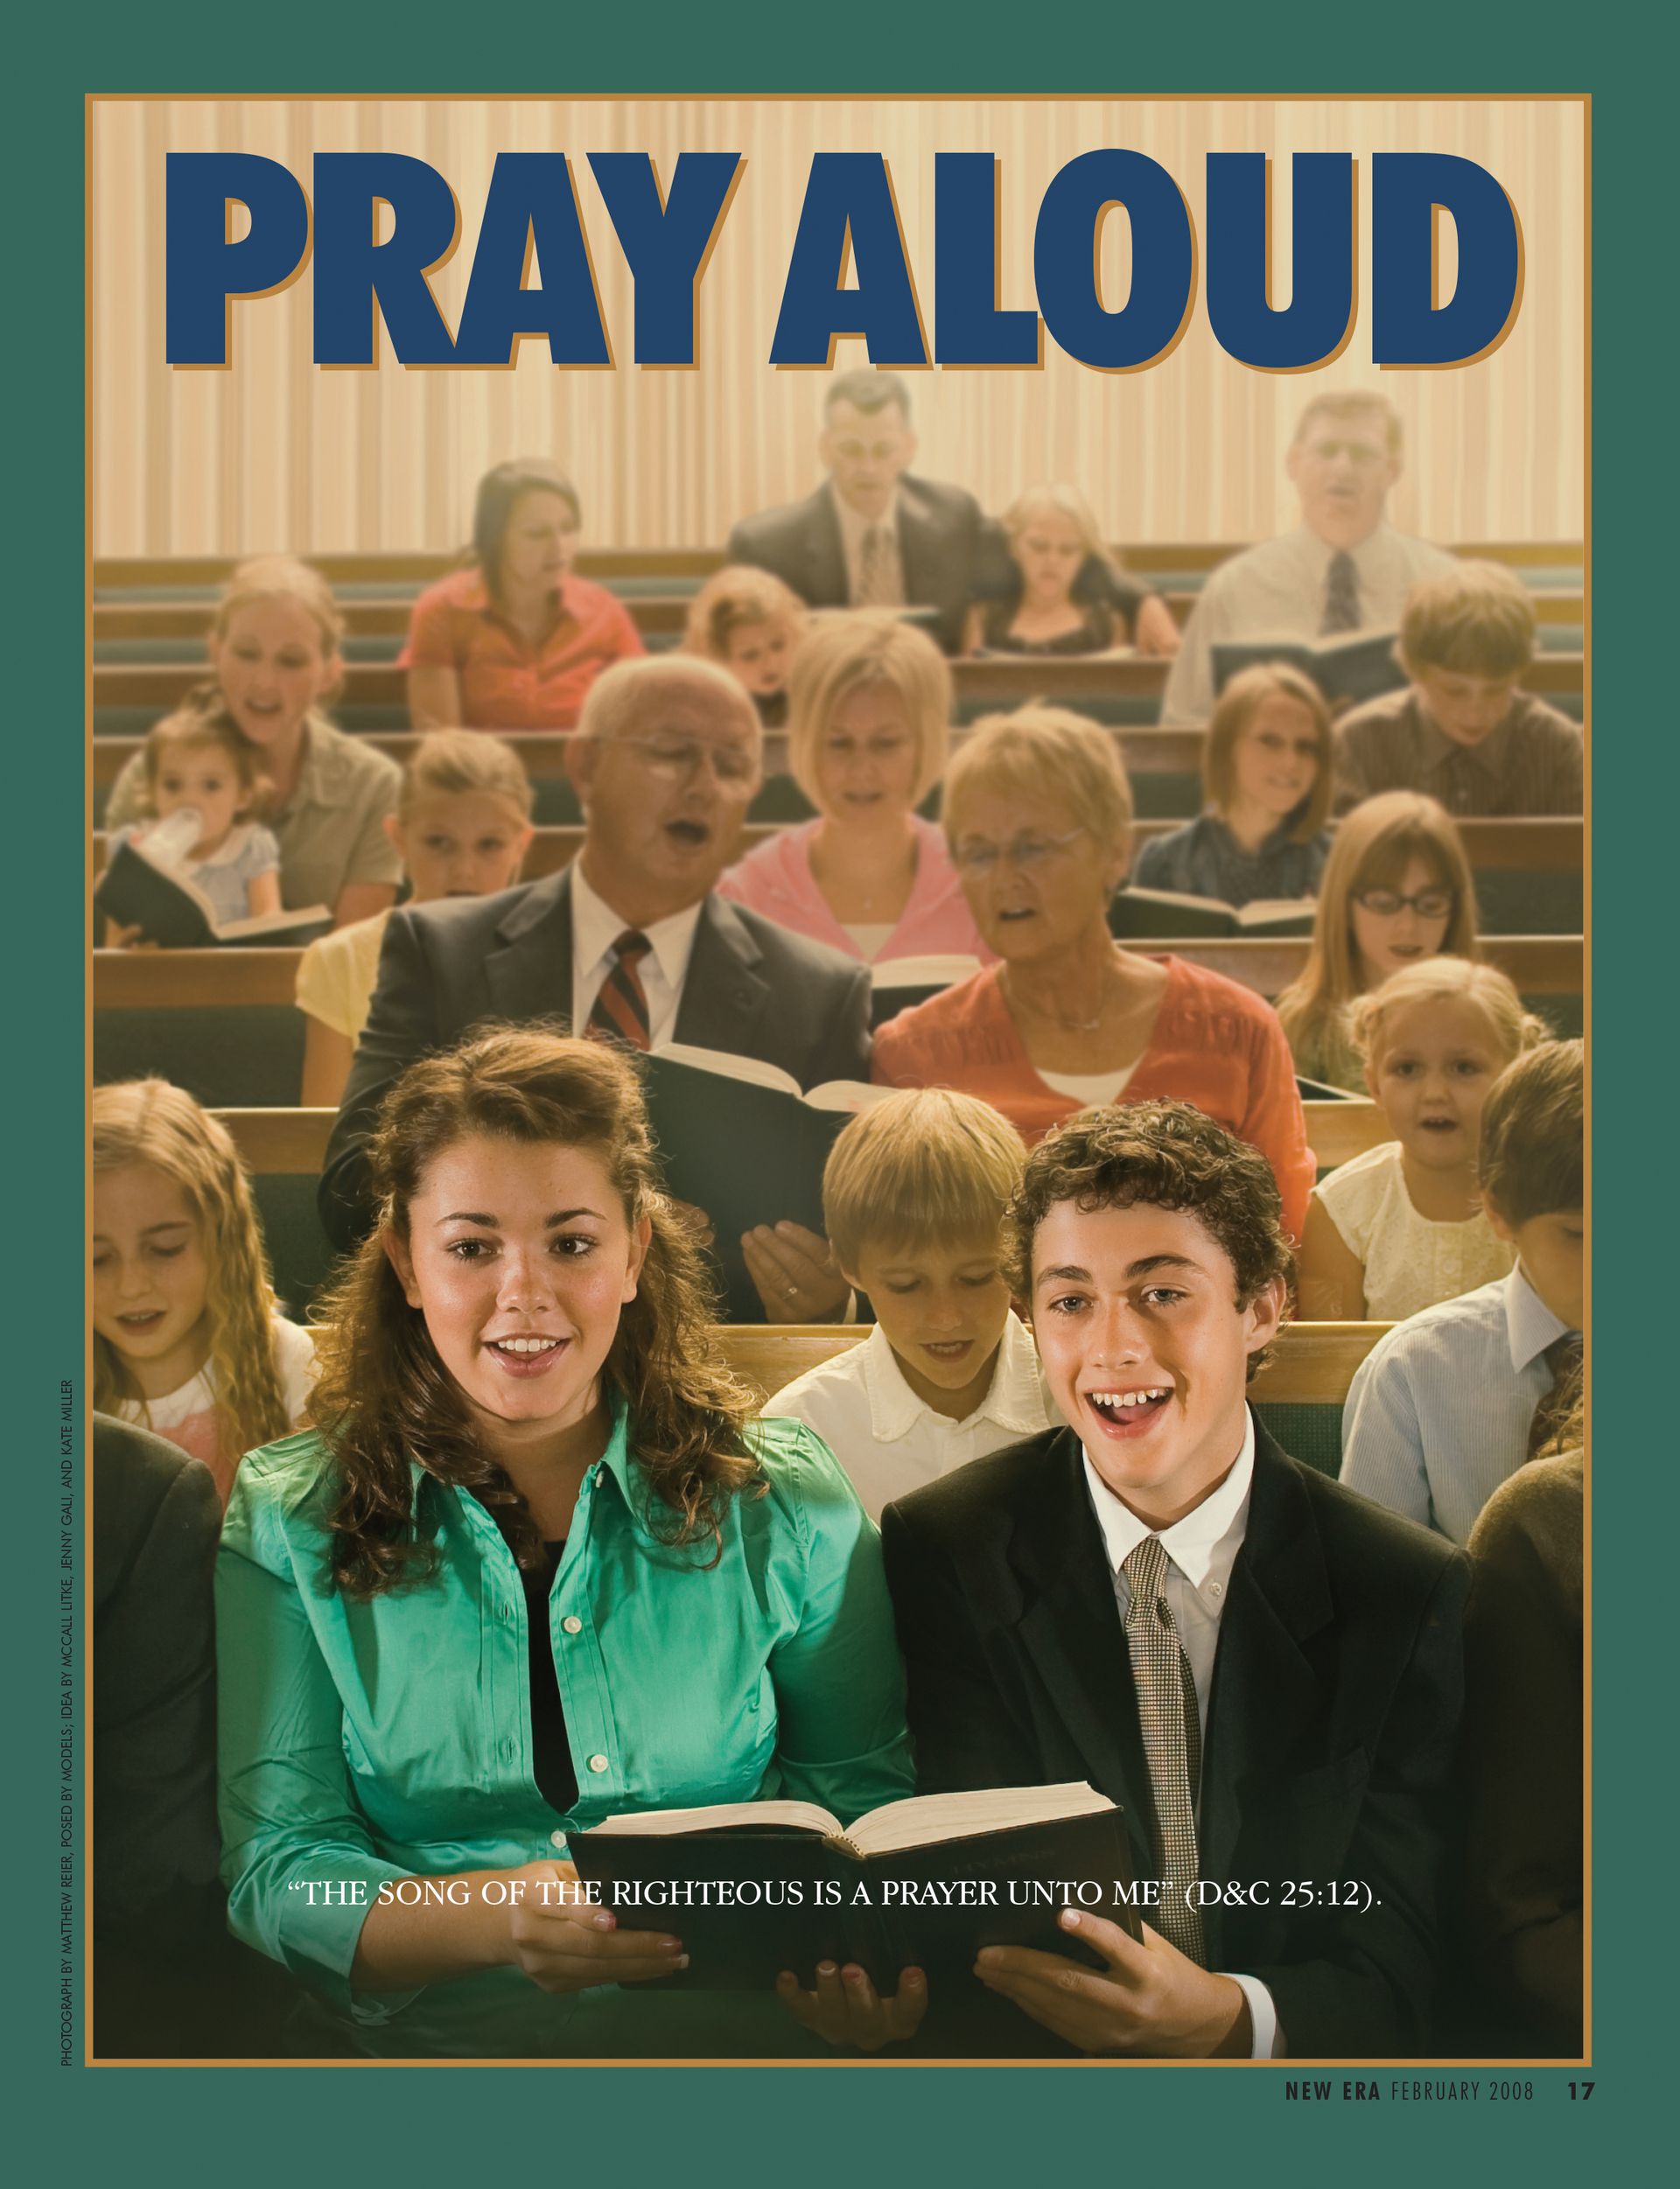 Pray Aloud. “The song of the righteous is a prayer unto me” (D&C 25:12). Feb. 2008 © undefined ipCode 1.